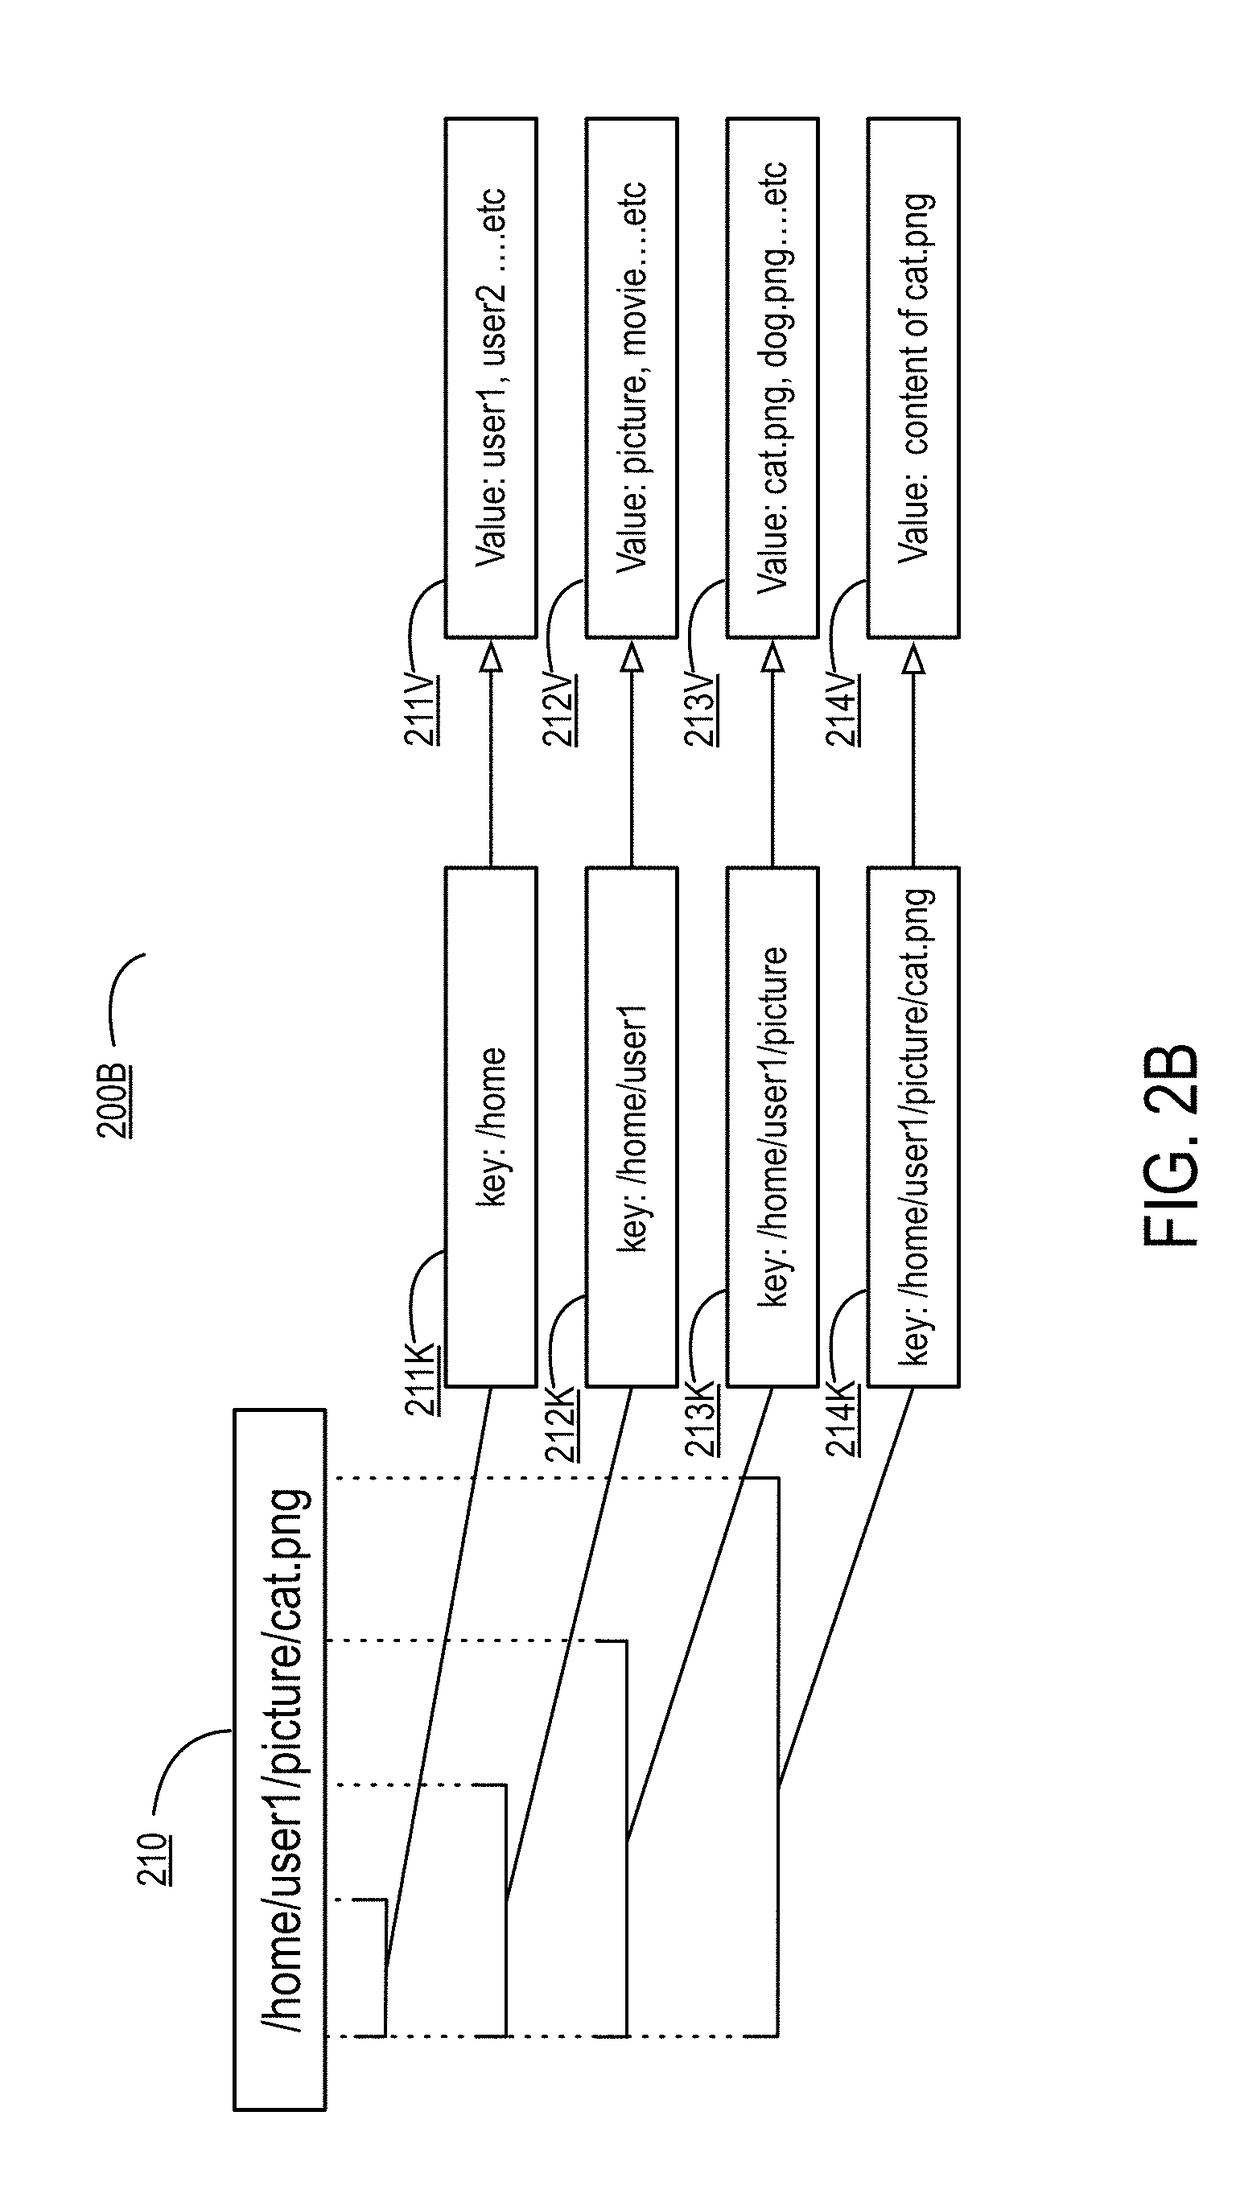 Systems, methods, and apparatuses for simplifying filesystem operations utilizing a key-value storage system